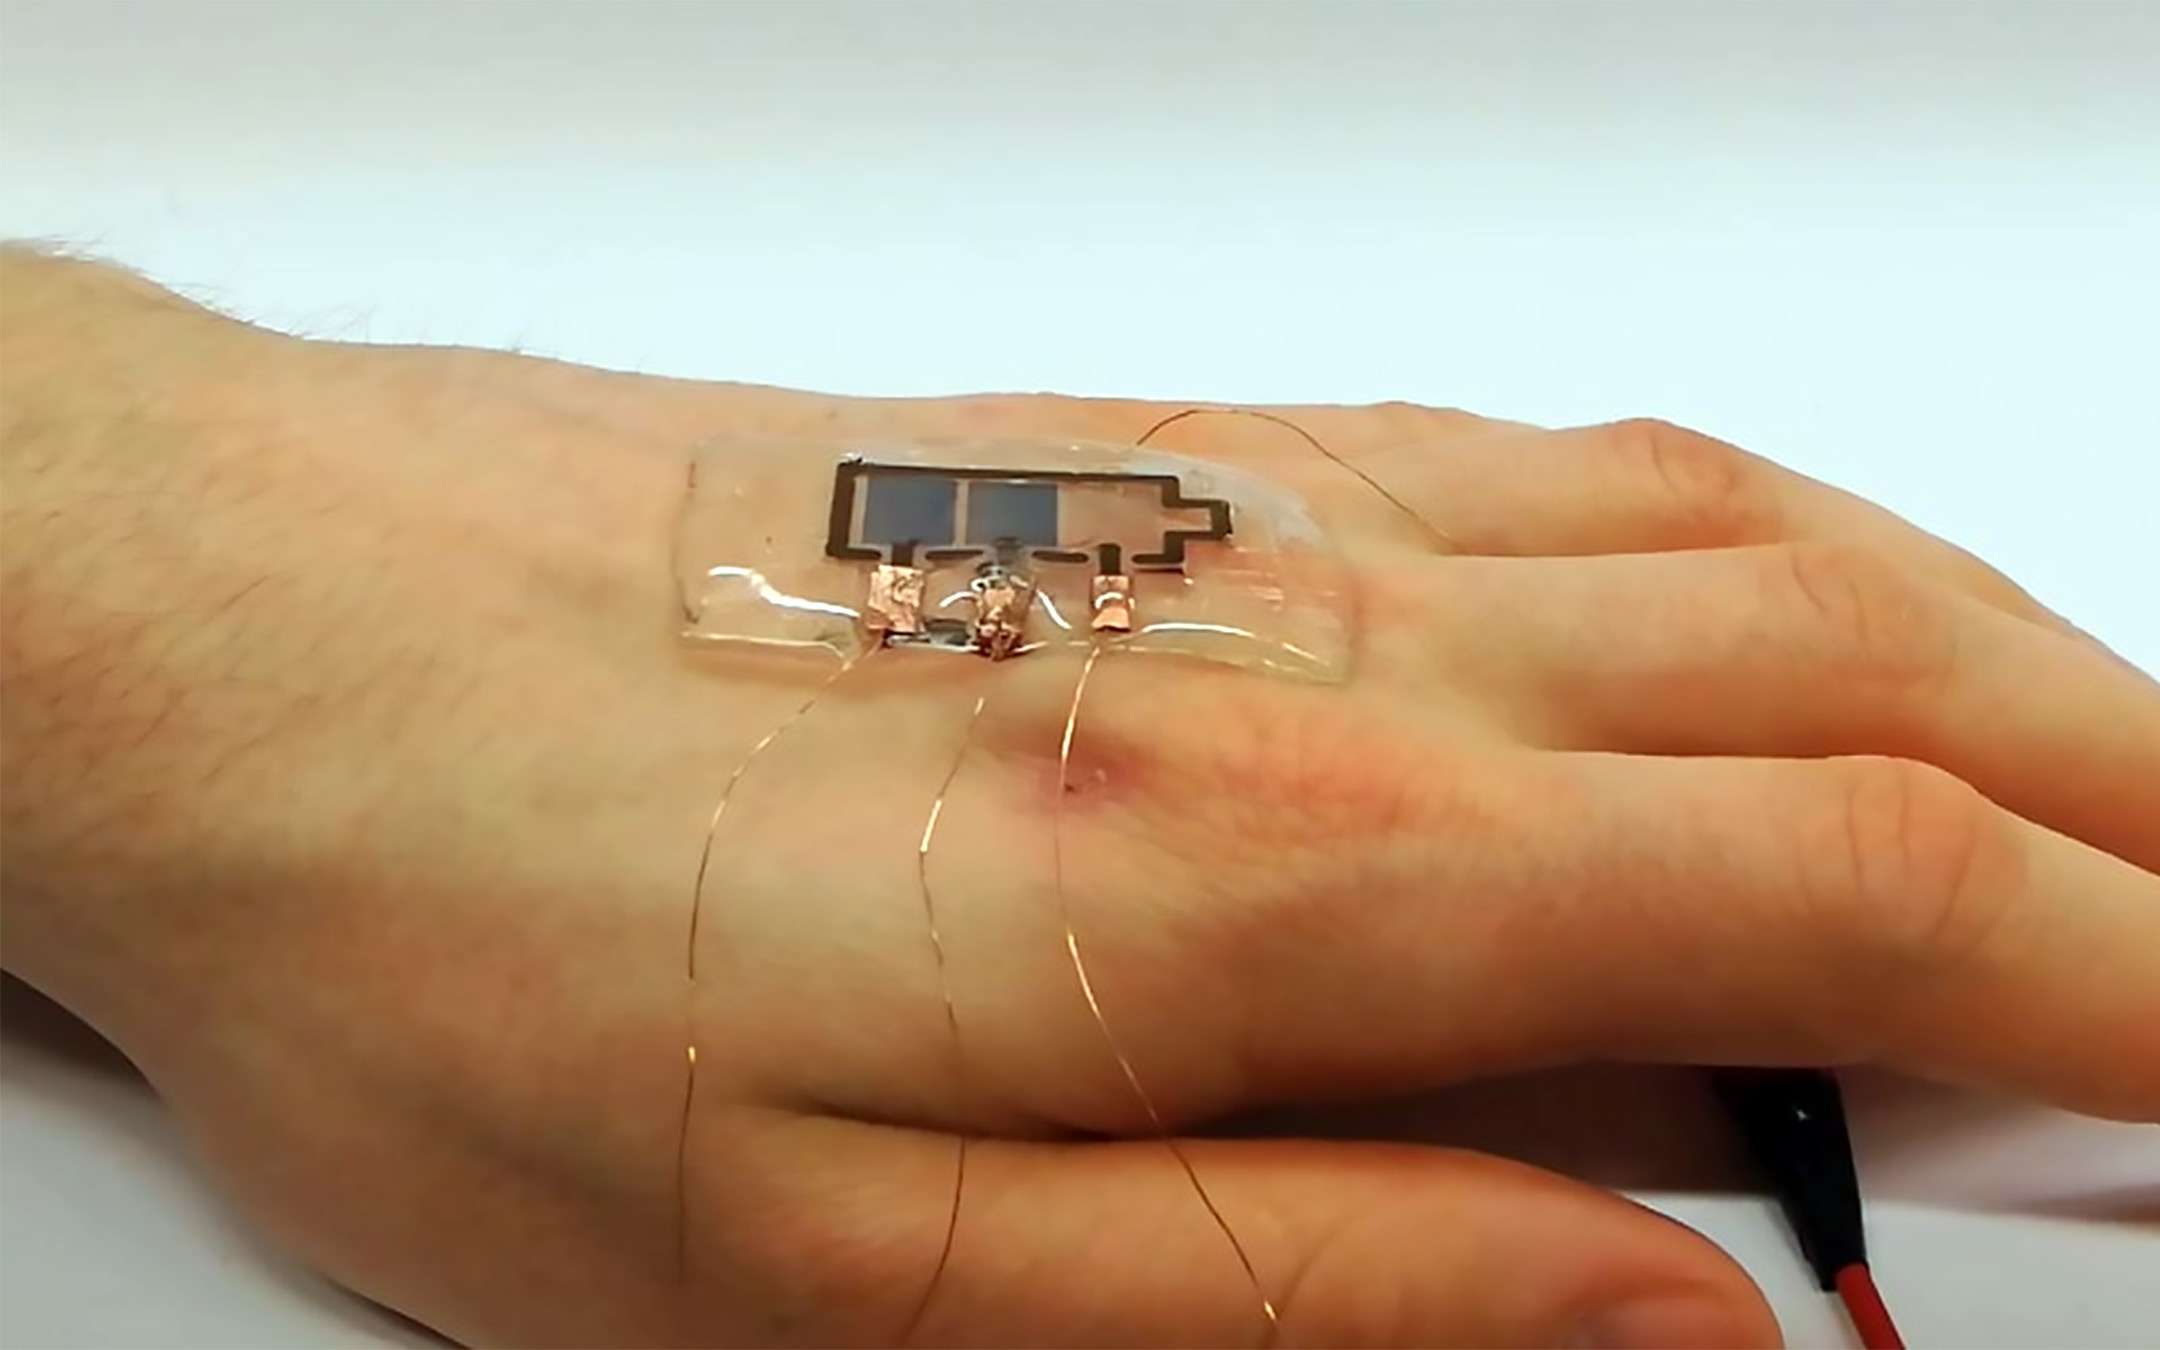 Biodegradable and flexible displays for the skin